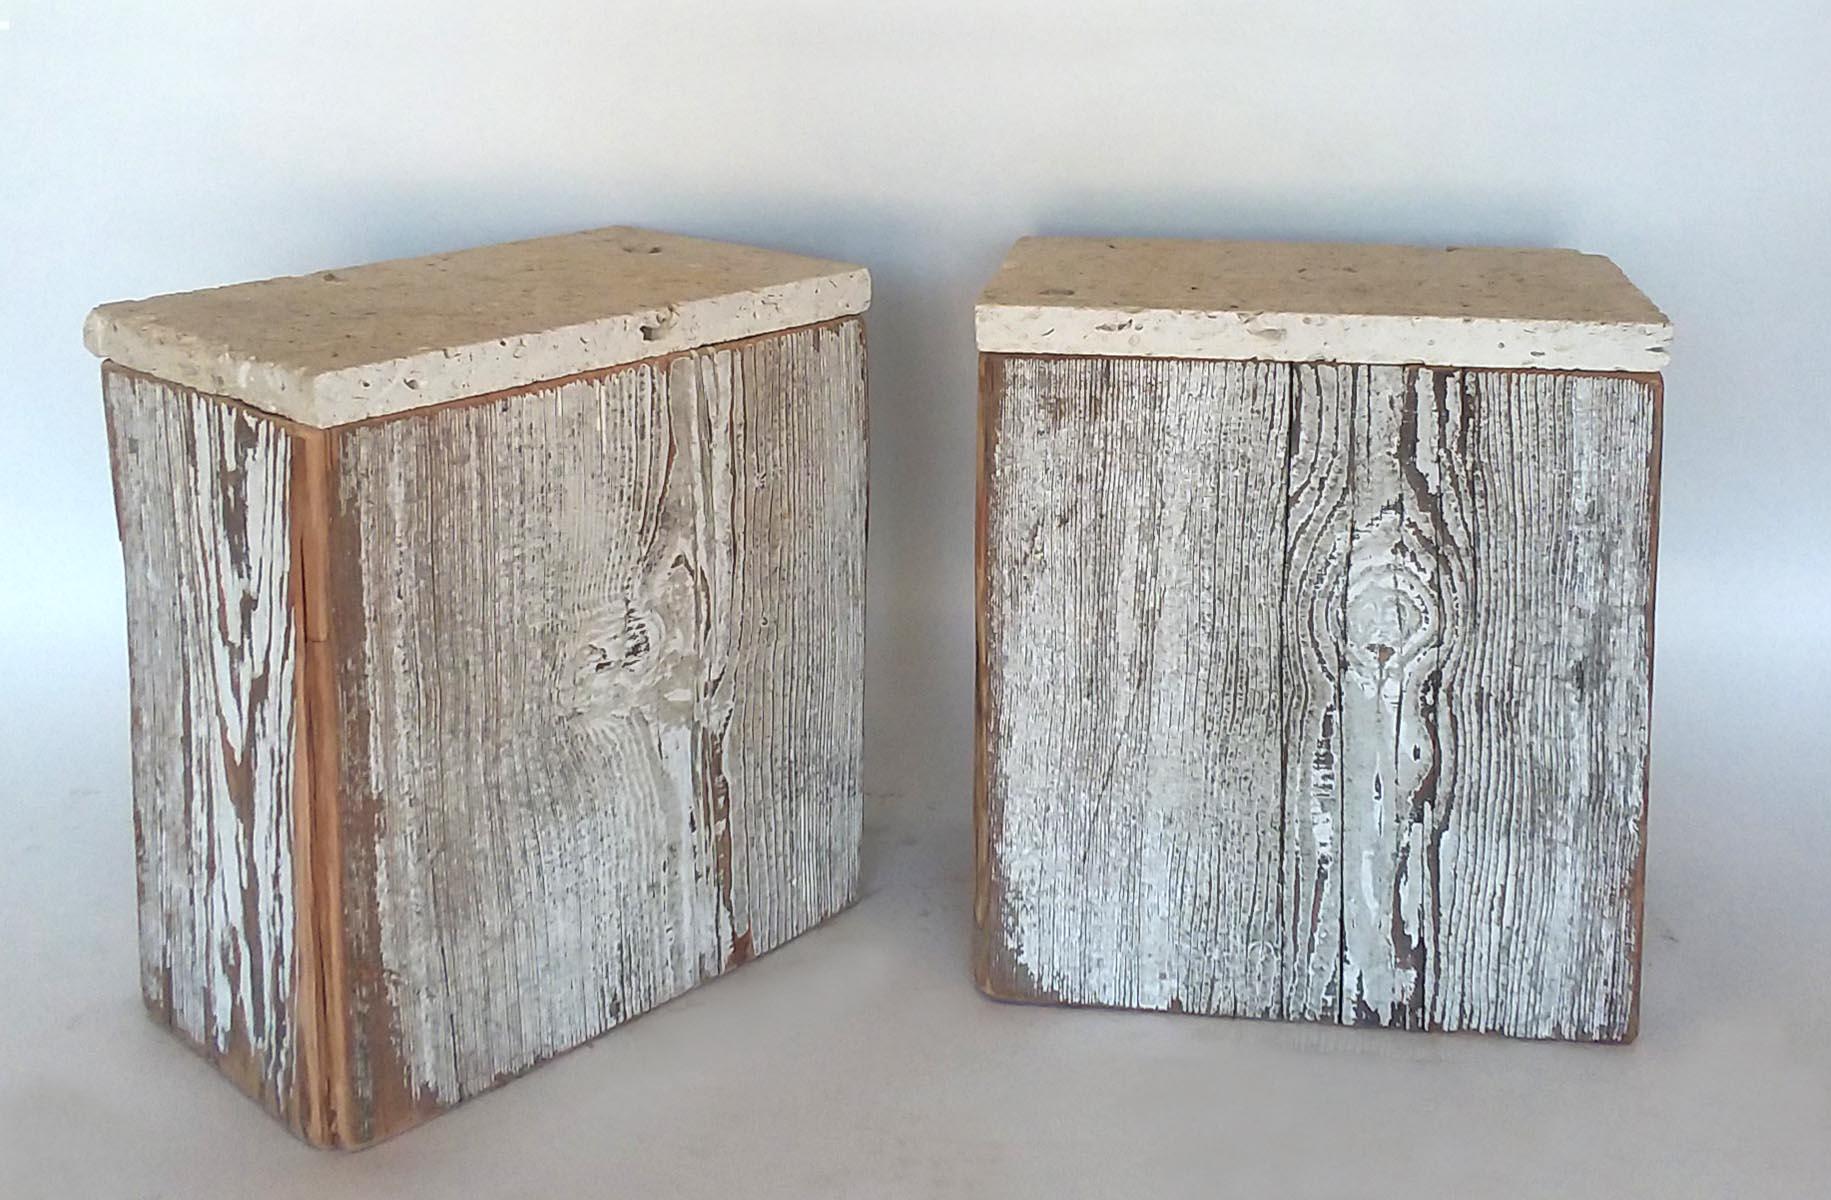 Pair of beautiful side tables made from reclaimed wood with traces of old white paint. The tops are Texas limestone. The interesting texture of the limestone features actual fossils and imprints of fossils. Newly cut stone tops. Surface is smooth